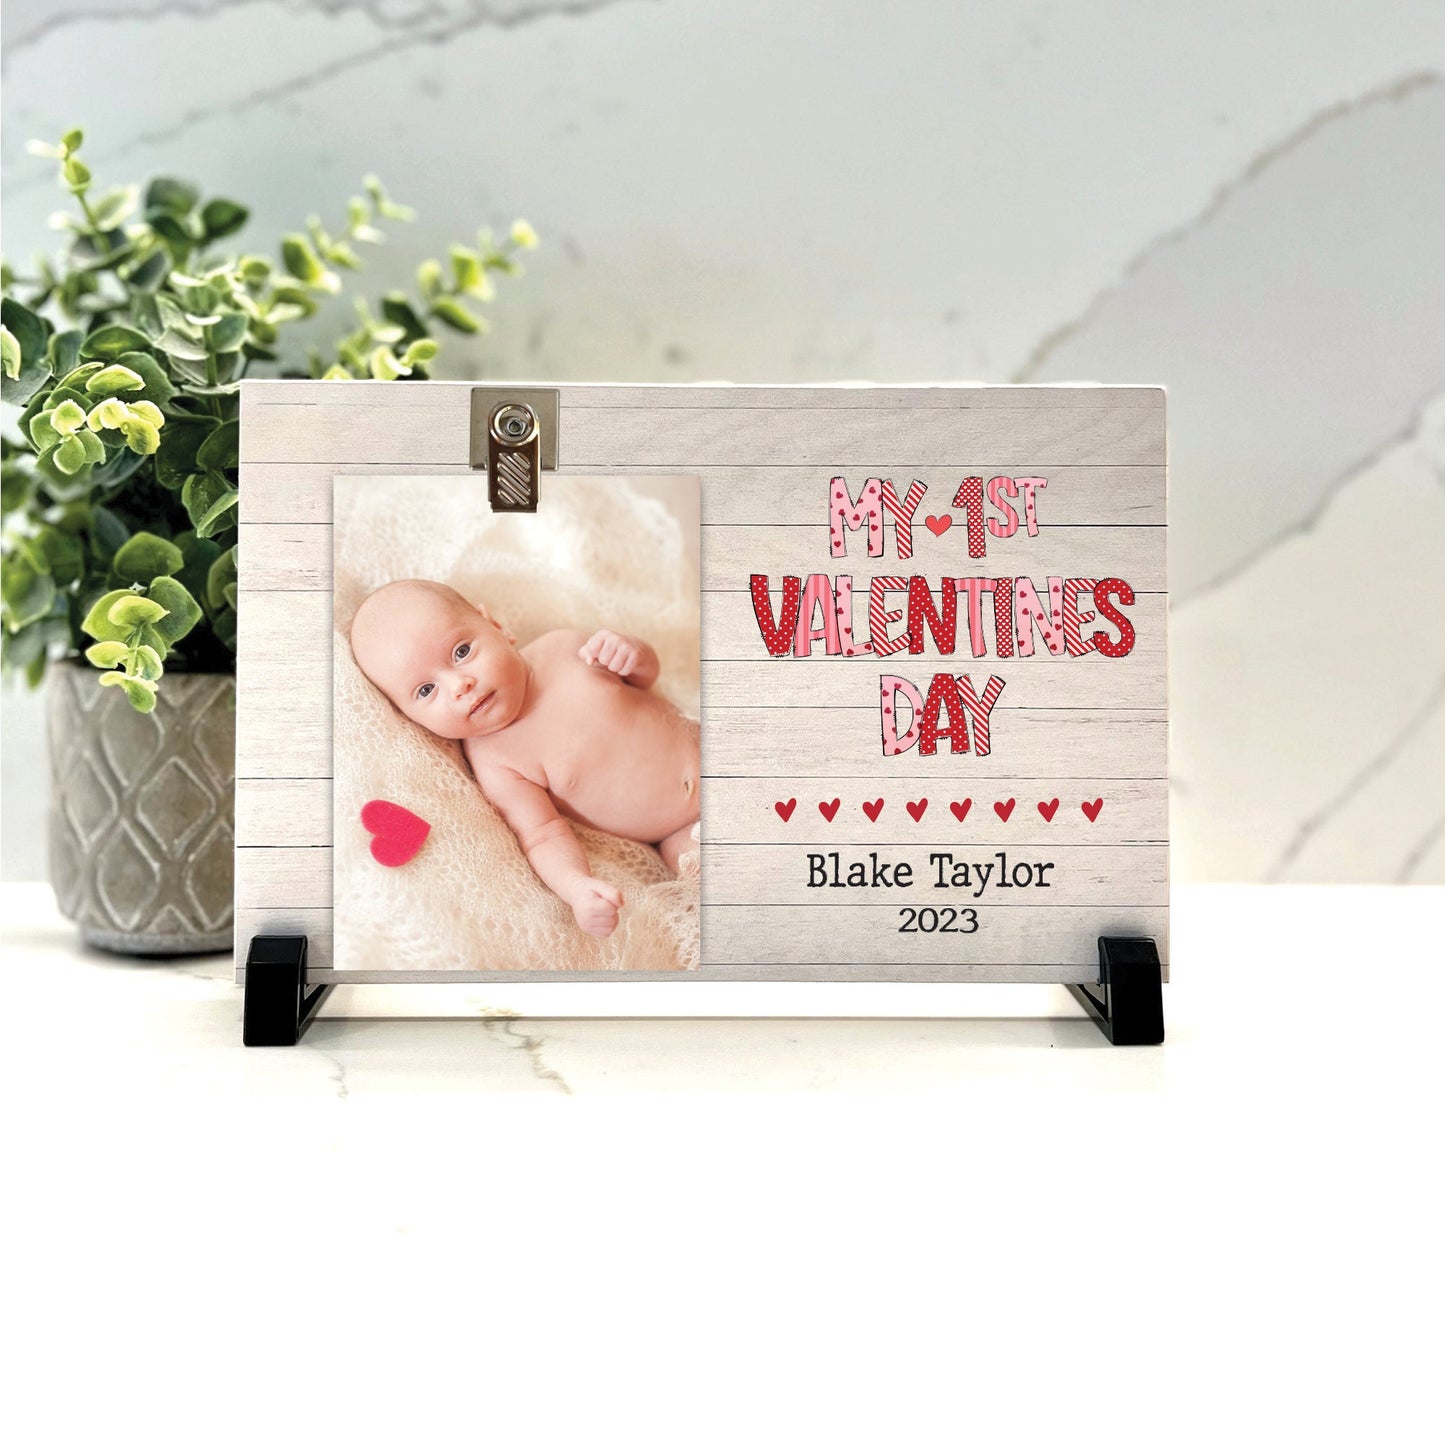 My First Valentines Day Personalized Picture Frame, My First Valentines Frame, Baby's First Valentines Day picture frame 2024